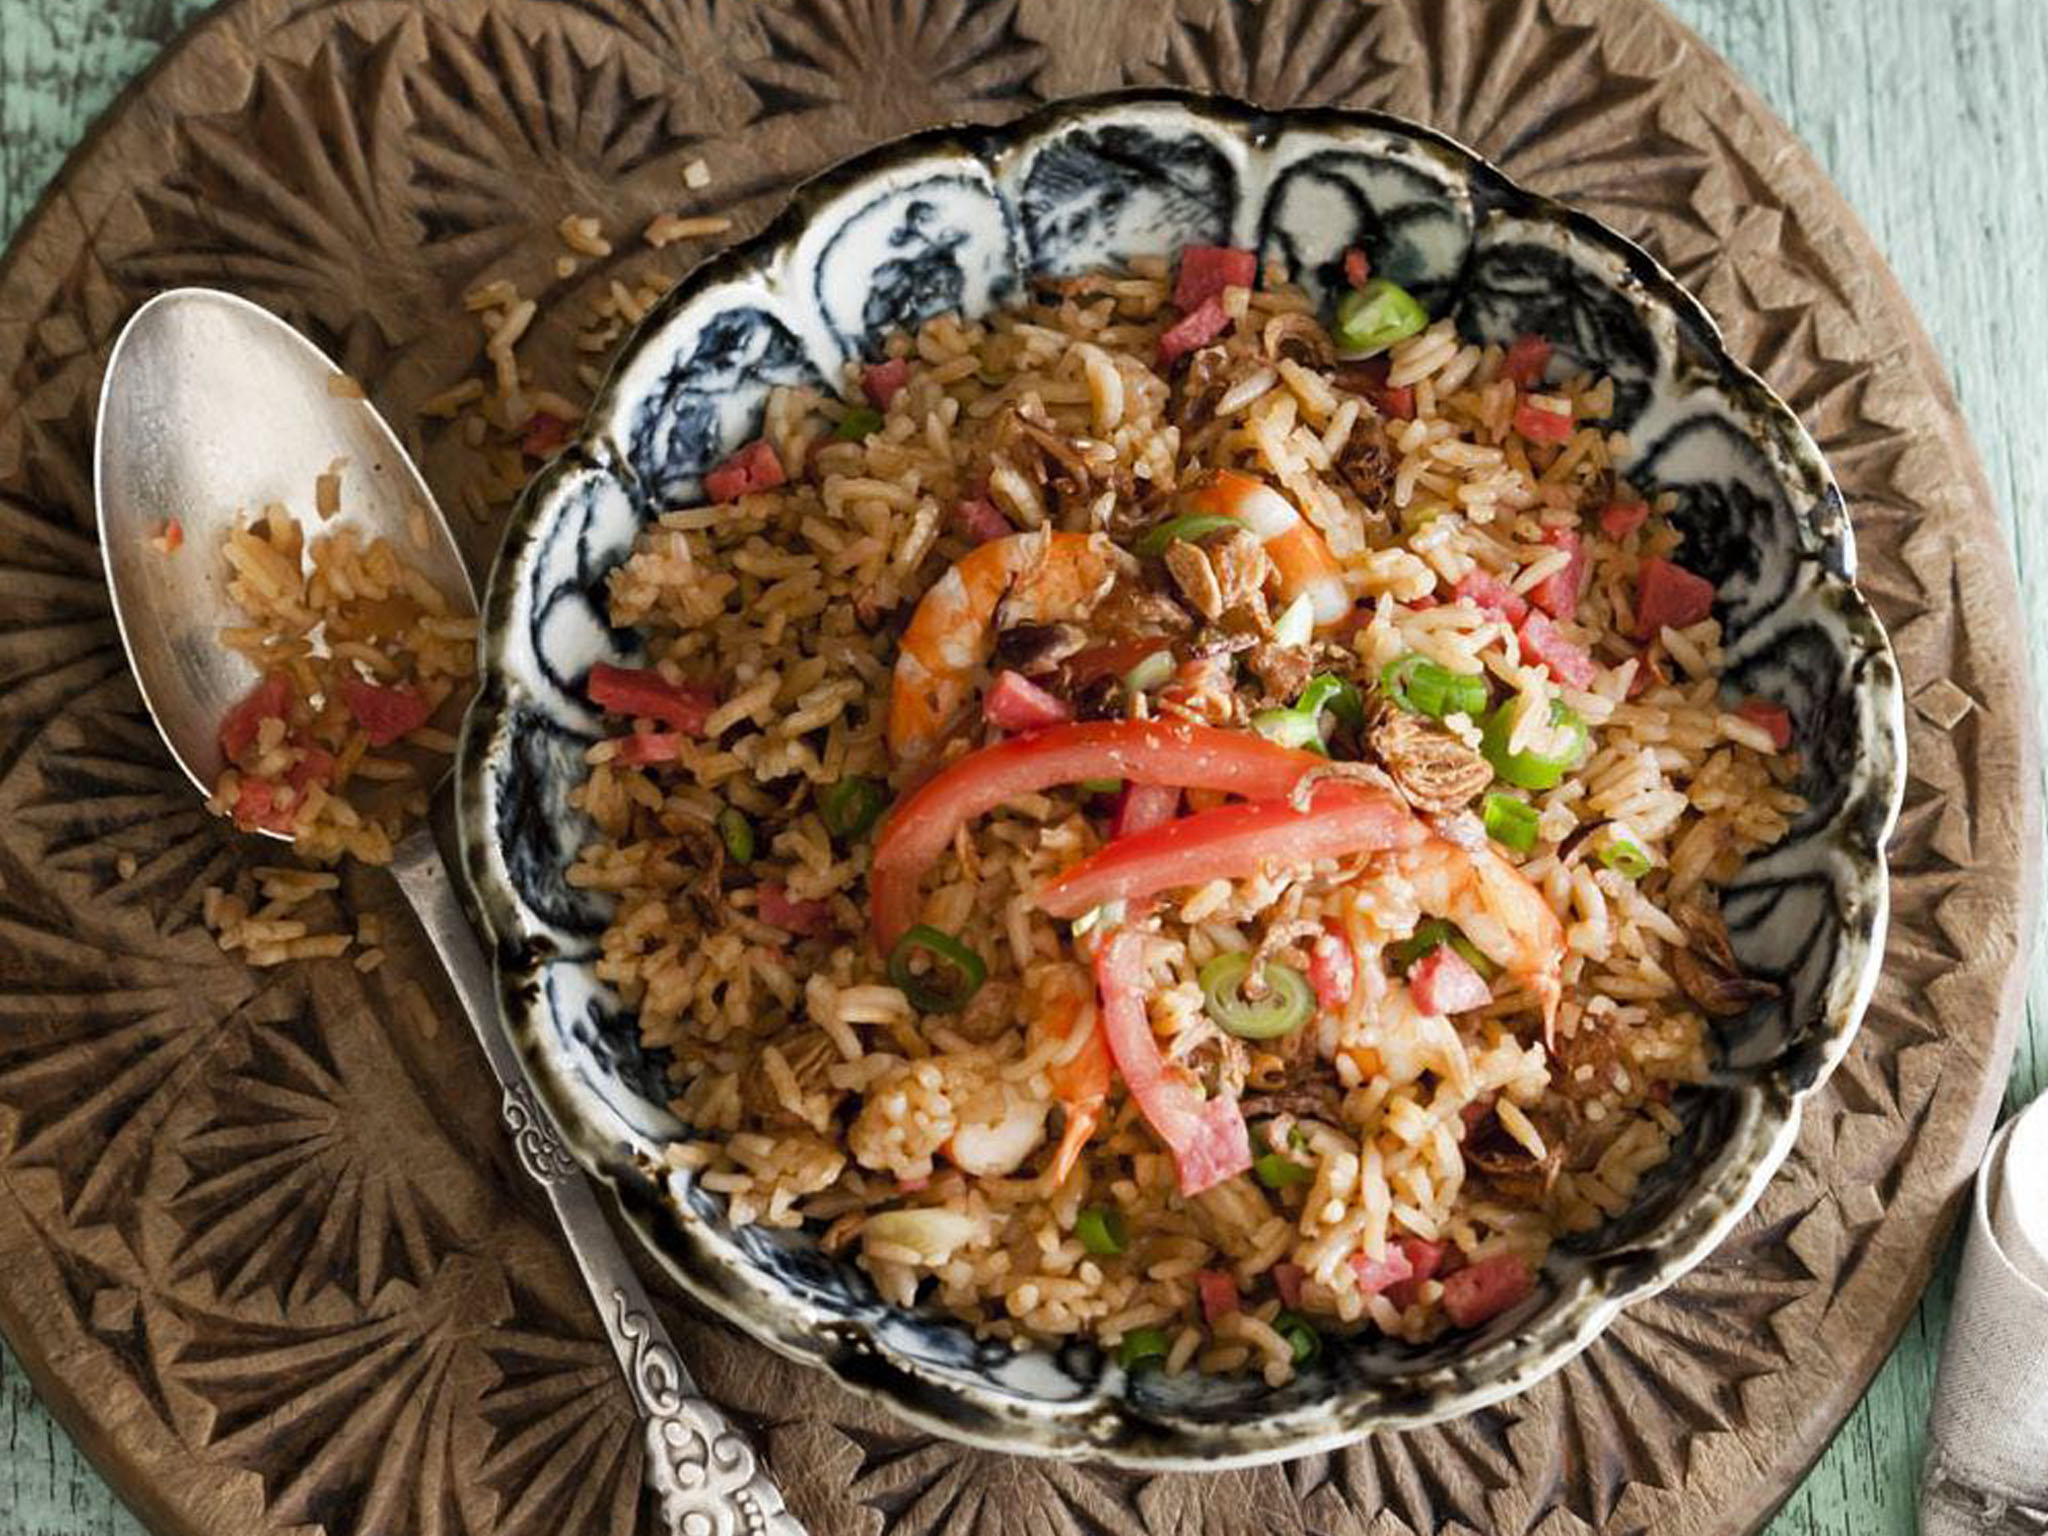 indonesian-style fried rice